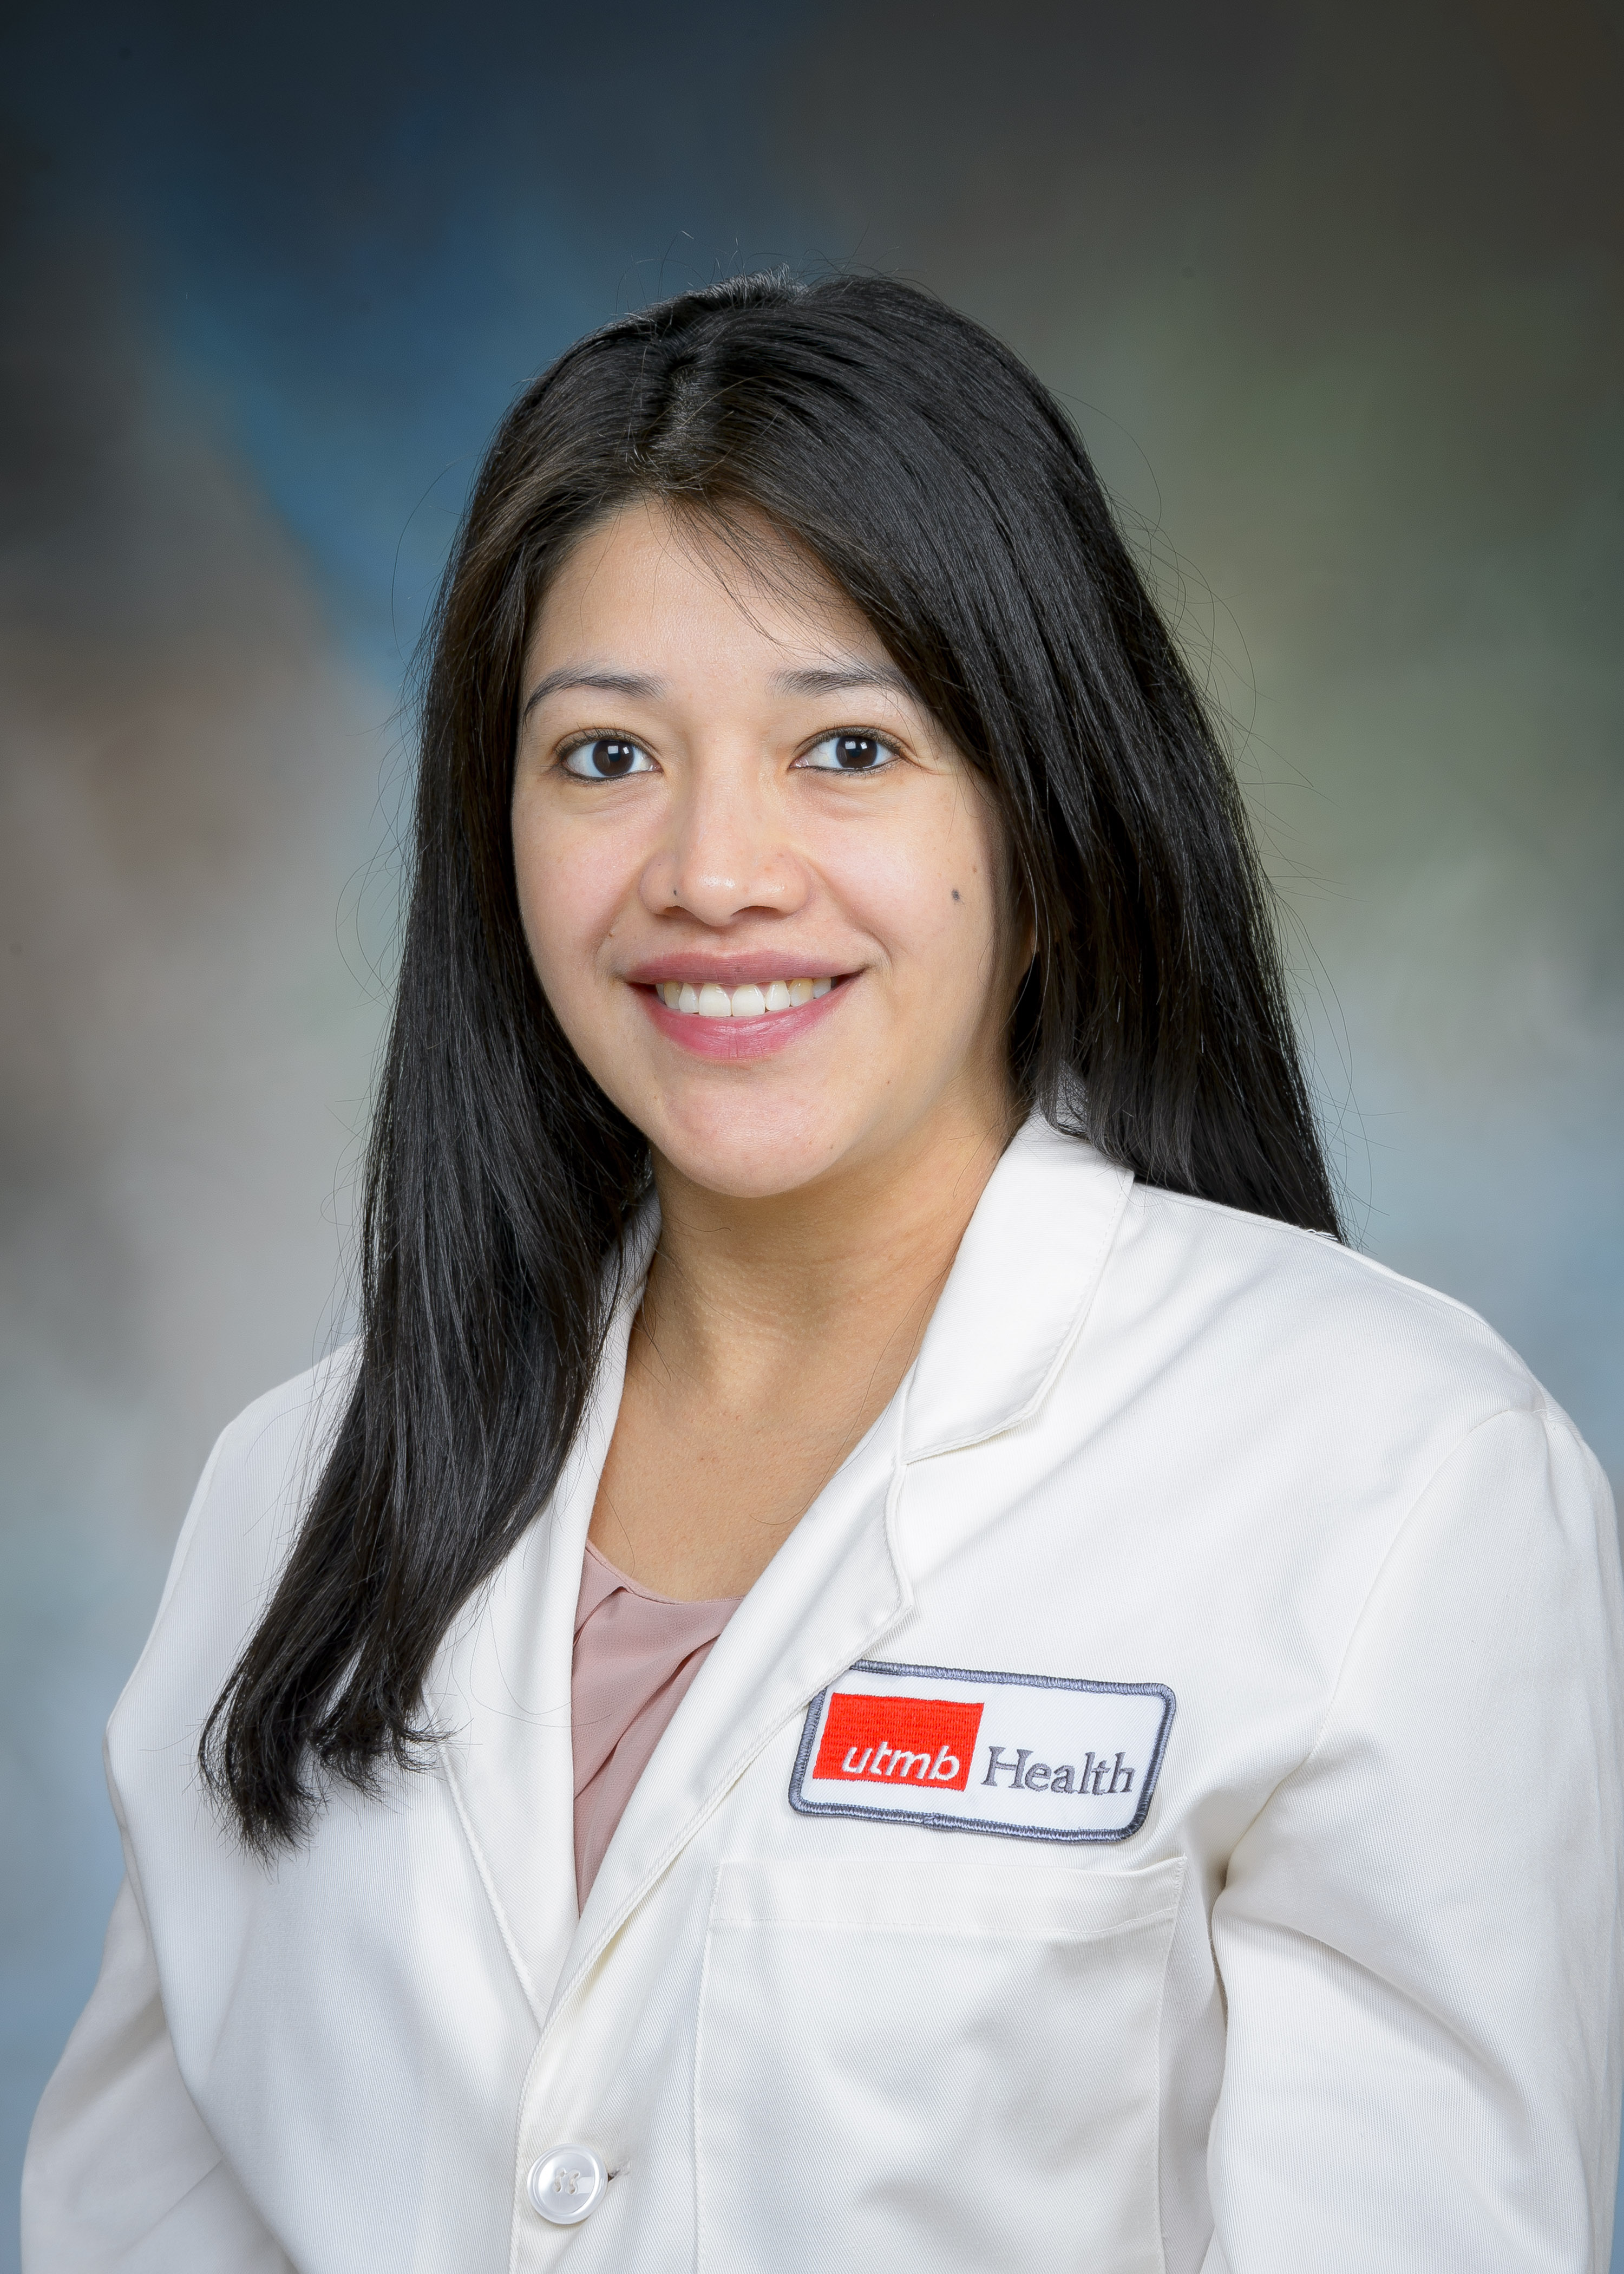 headshot image of utmb health pediatric surgeon dr. maria carmen mora - she is wearing a white coat over a blush colored top and has chest-length black hair split down the middle